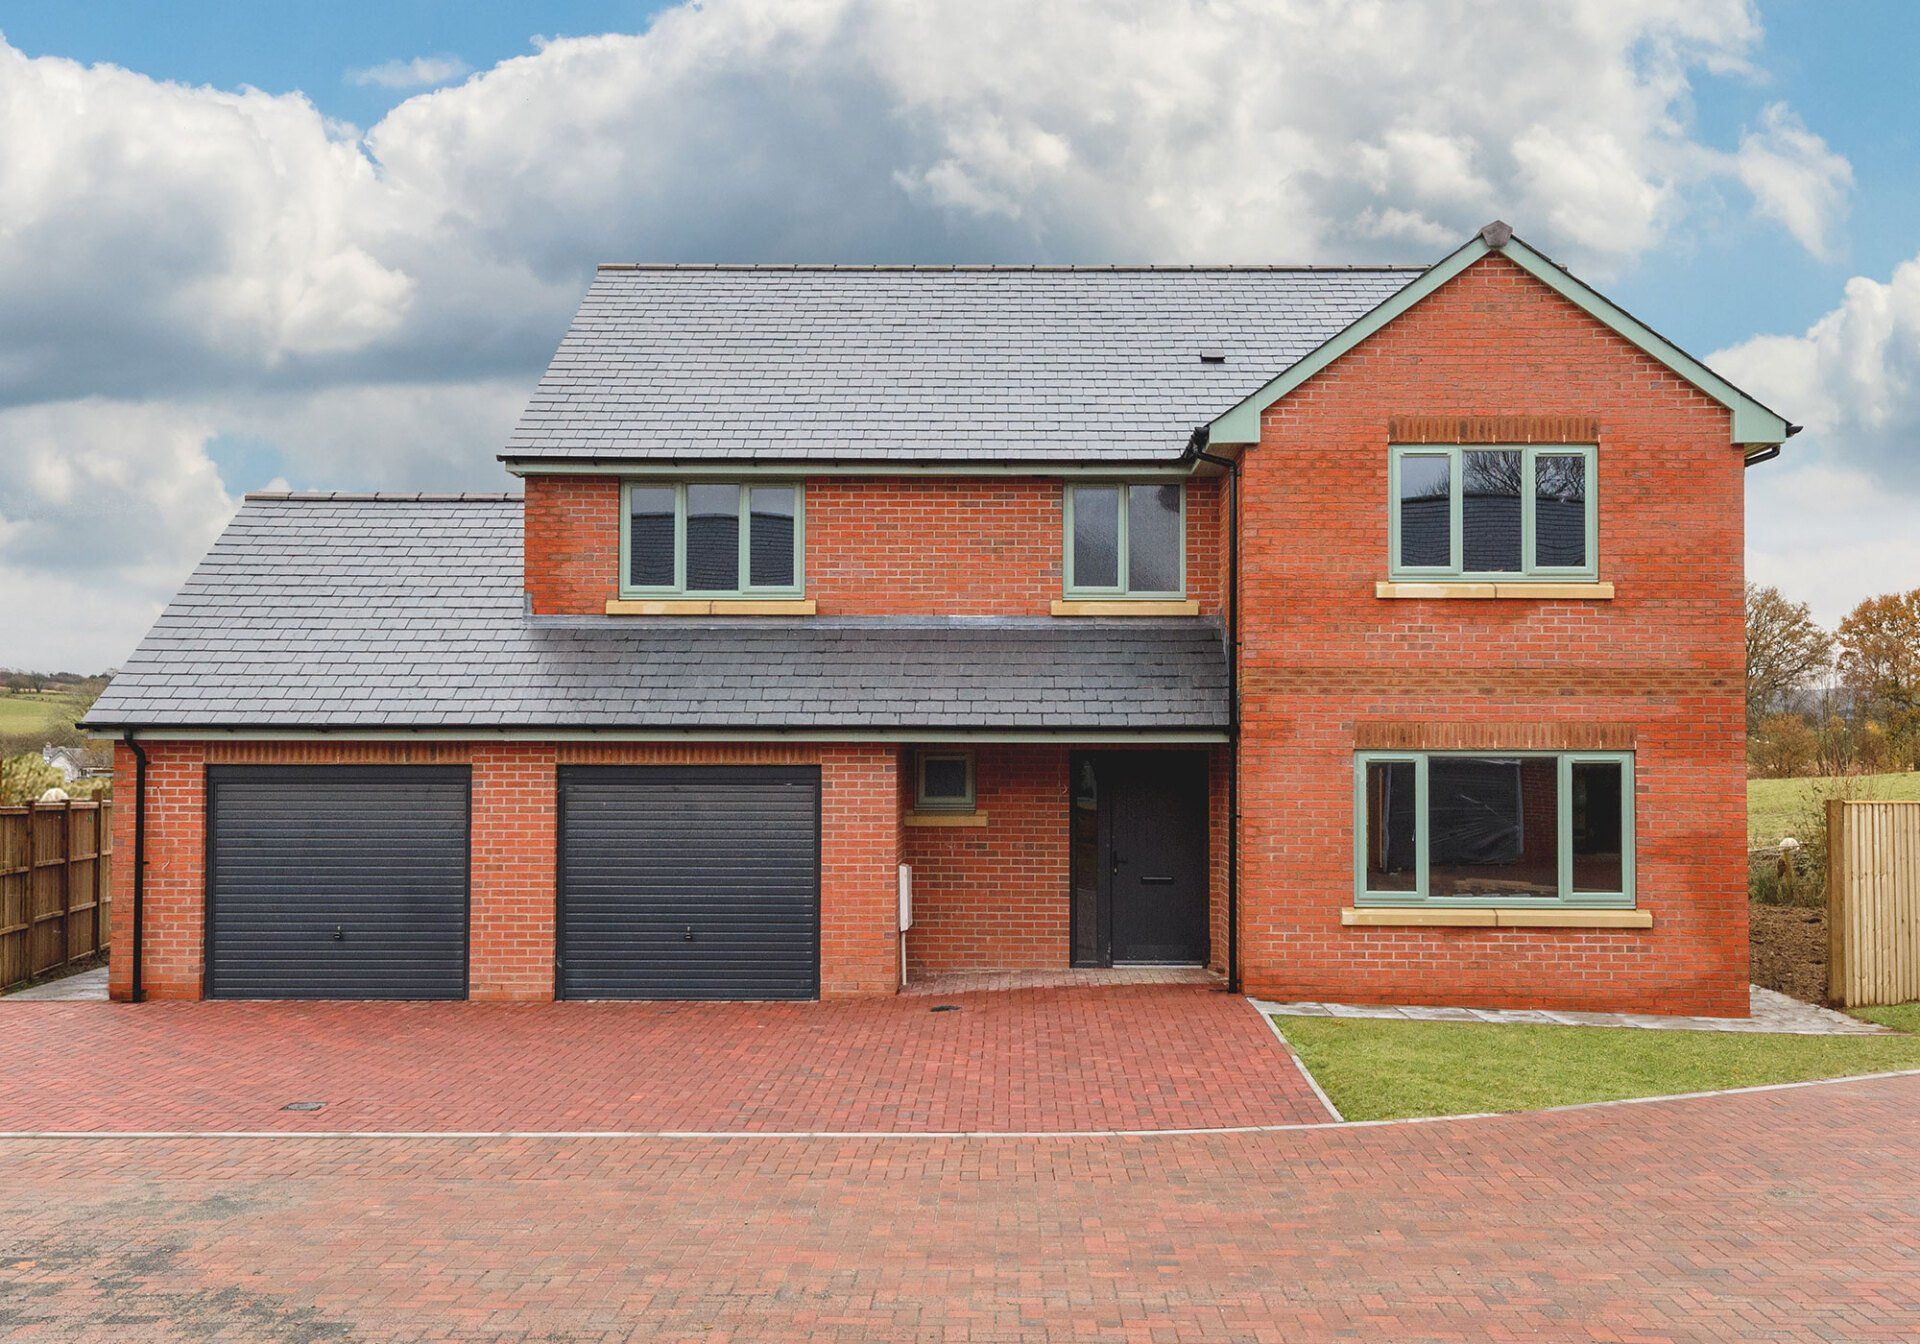 Powis (plot 6 shown) is a 4-bed detached property with integrated double garage.